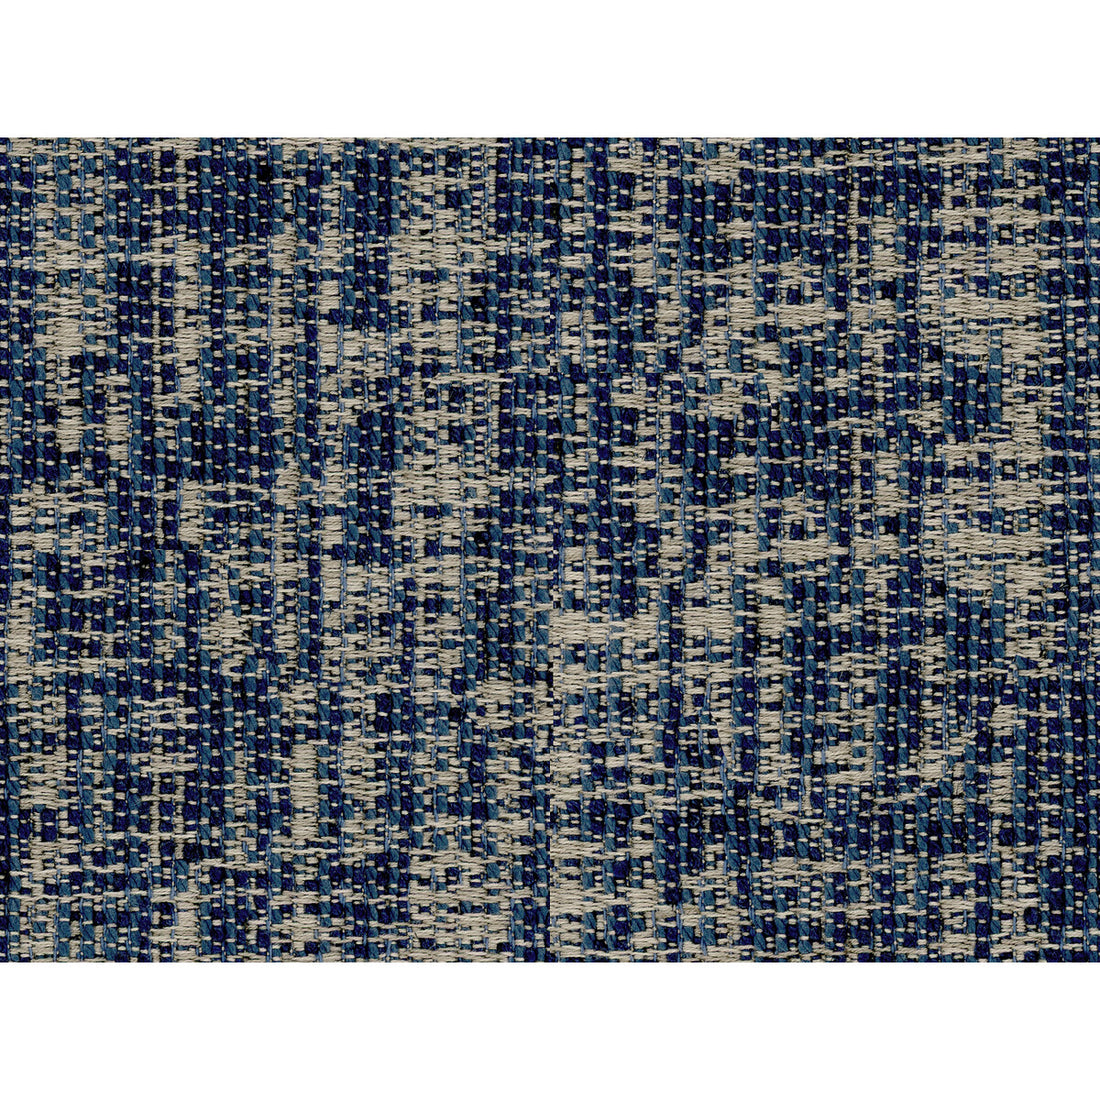 Cumbria fabric in sapphire color - pattern 2016123.50.0 - by Lee Jofa in the Furness Weaves collection